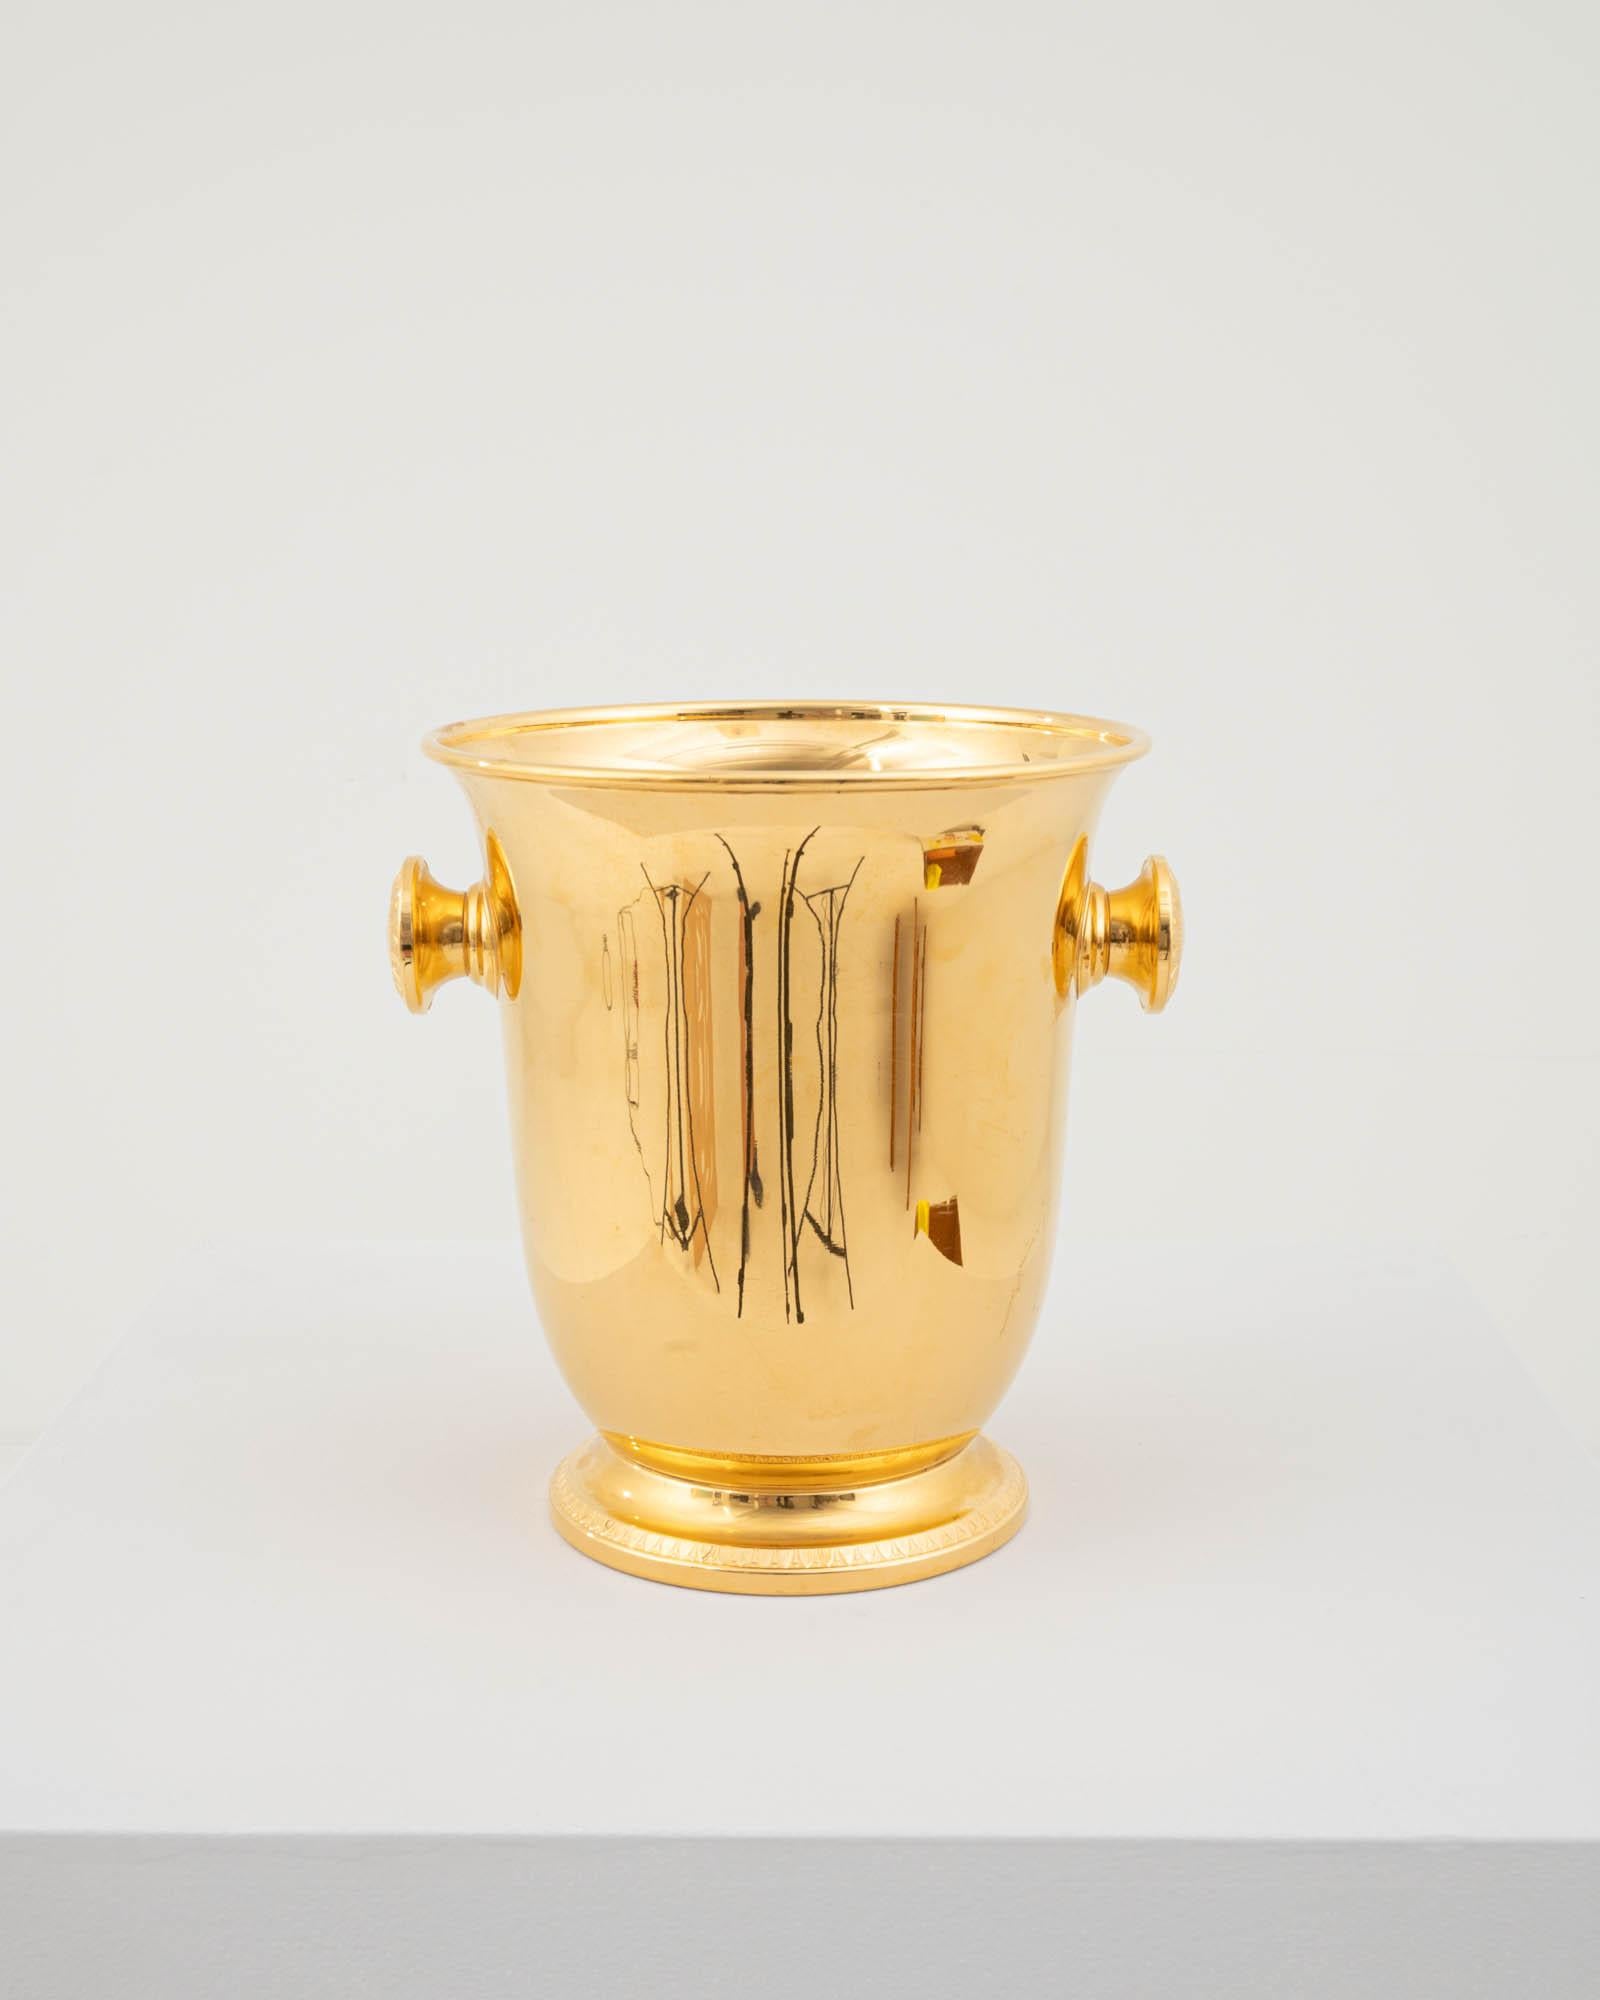 This exquisite vintage ice bucket was designed in Germany during the 20th century. Crafted from high-quality metal, the bucket is coated with a layer of gold plating for a luxurious finish. The edges of the base and elegantly rounded handles are